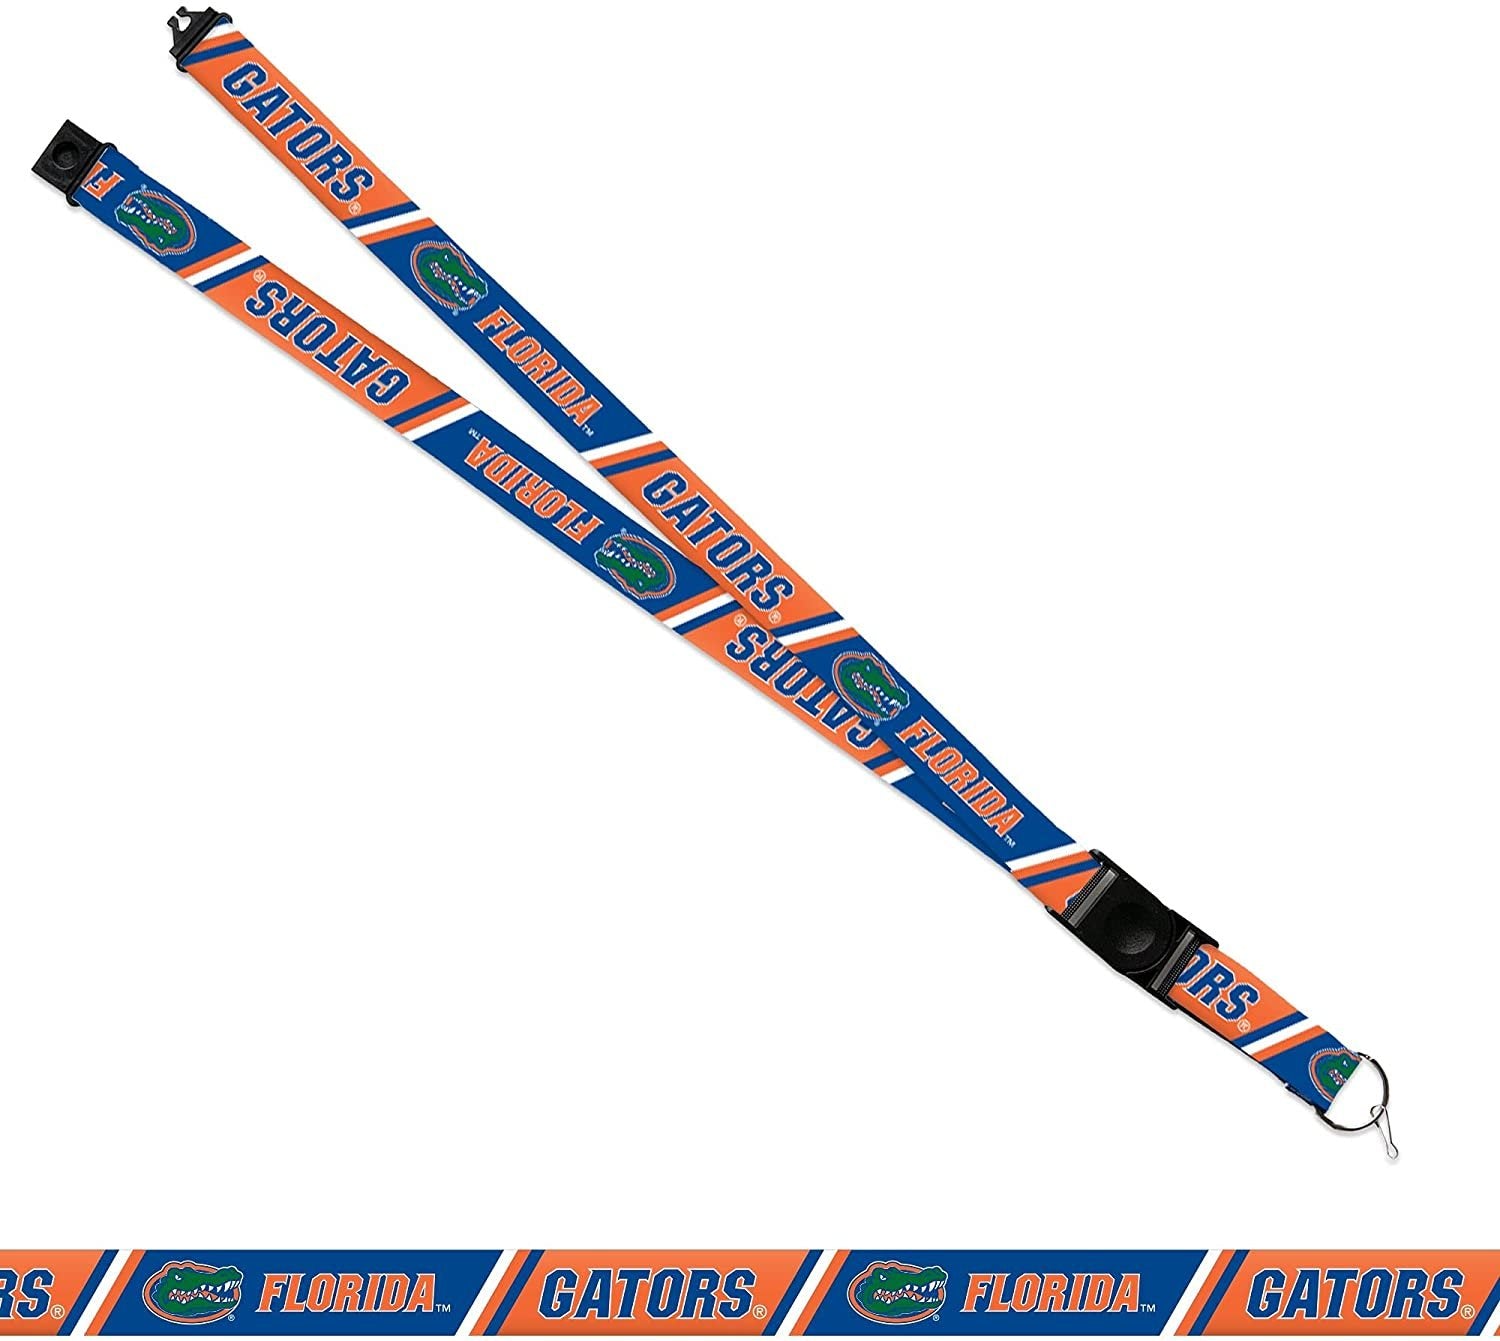 University of Florida Gators Lanyard Keychain Double Sided 18 Inch Button Clip Safety Breakaway